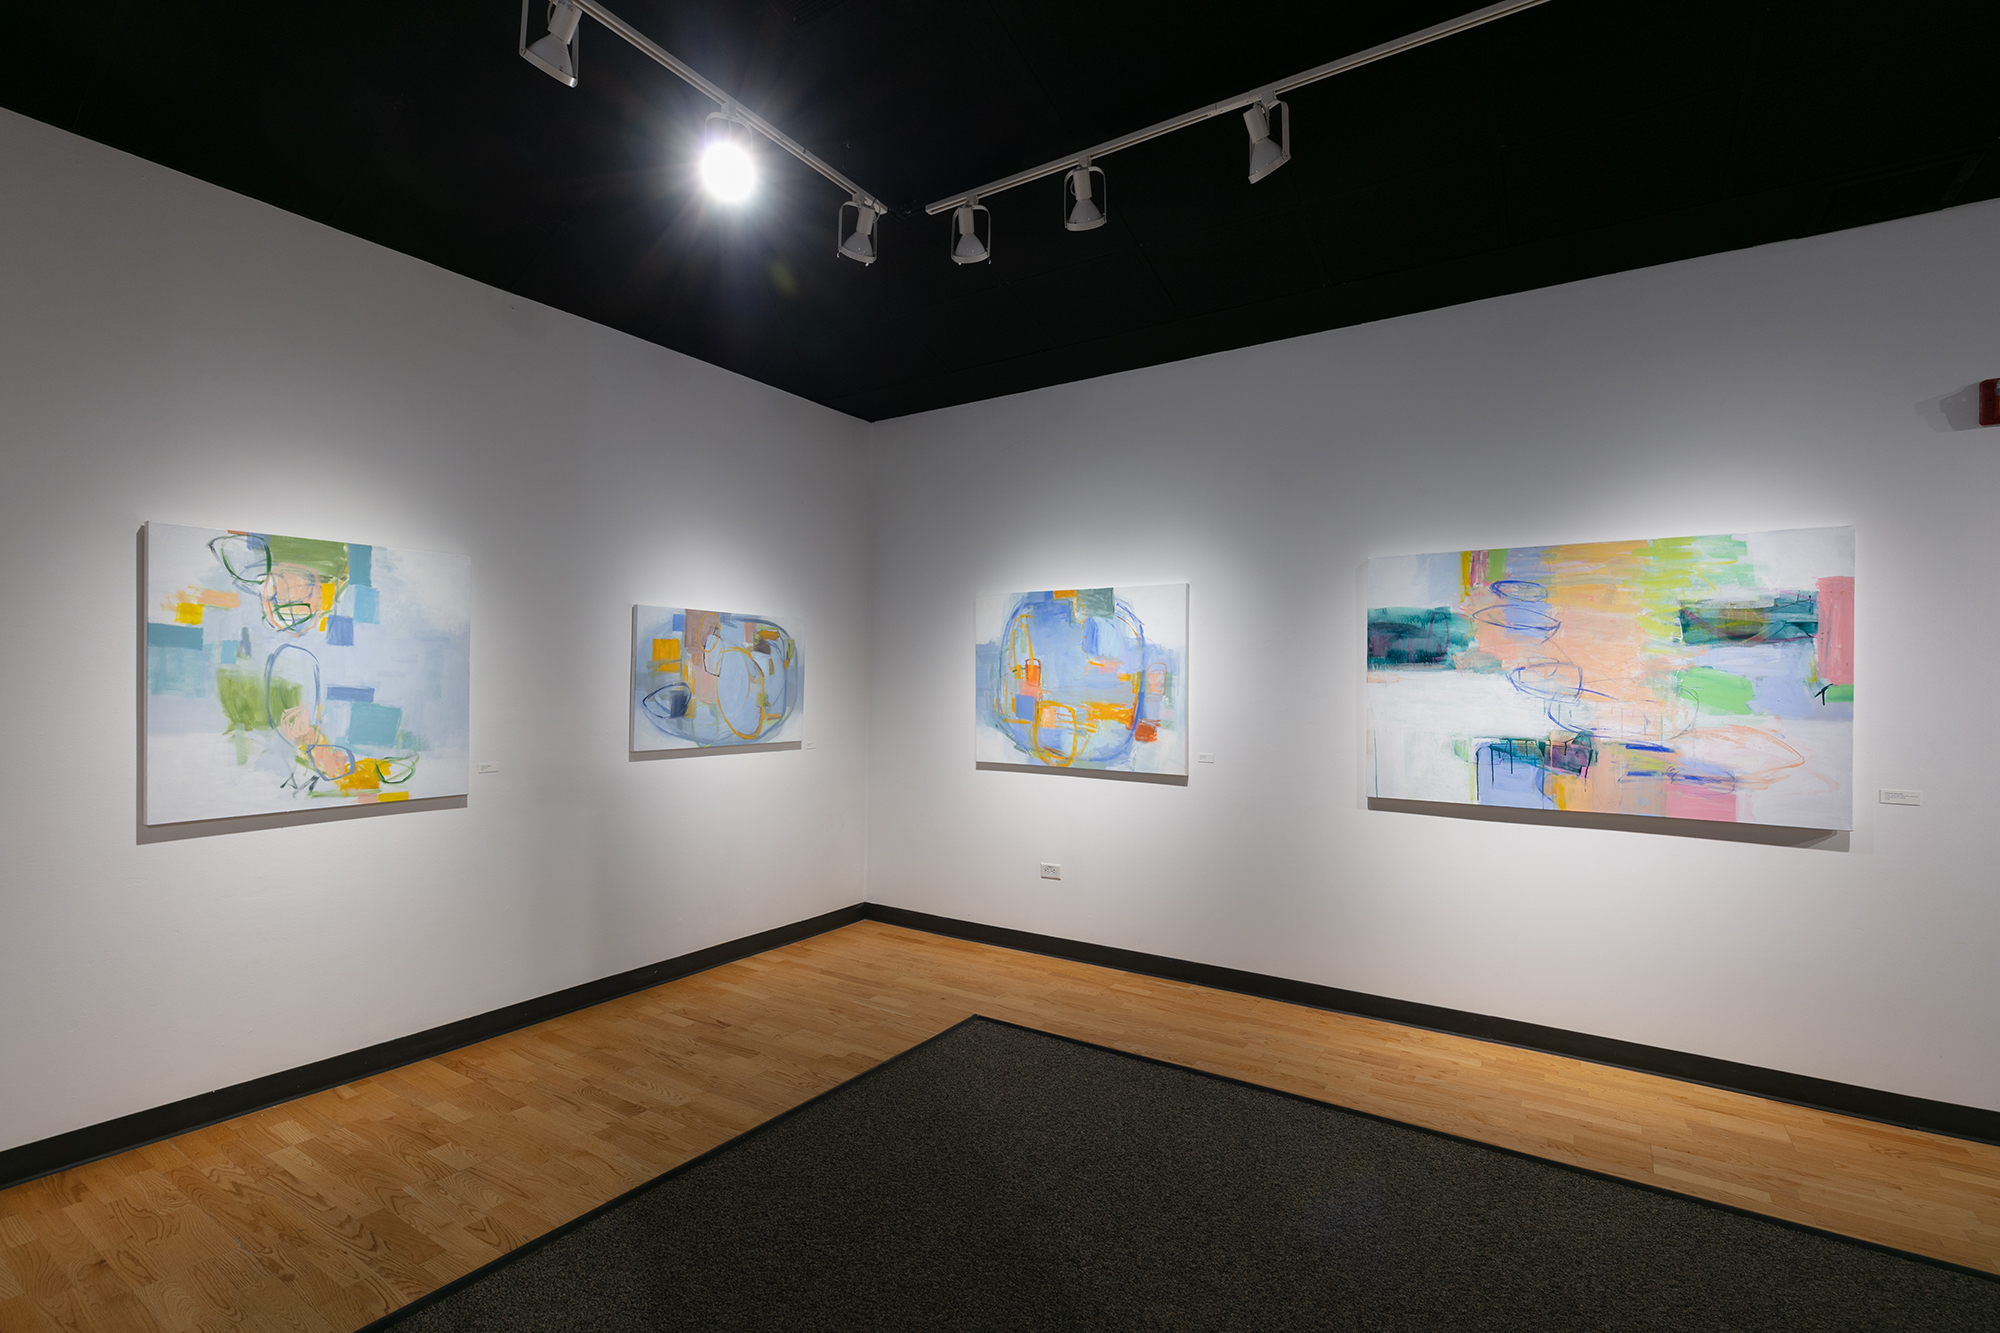 Julia Rymer's paintings installed in a gallery space.